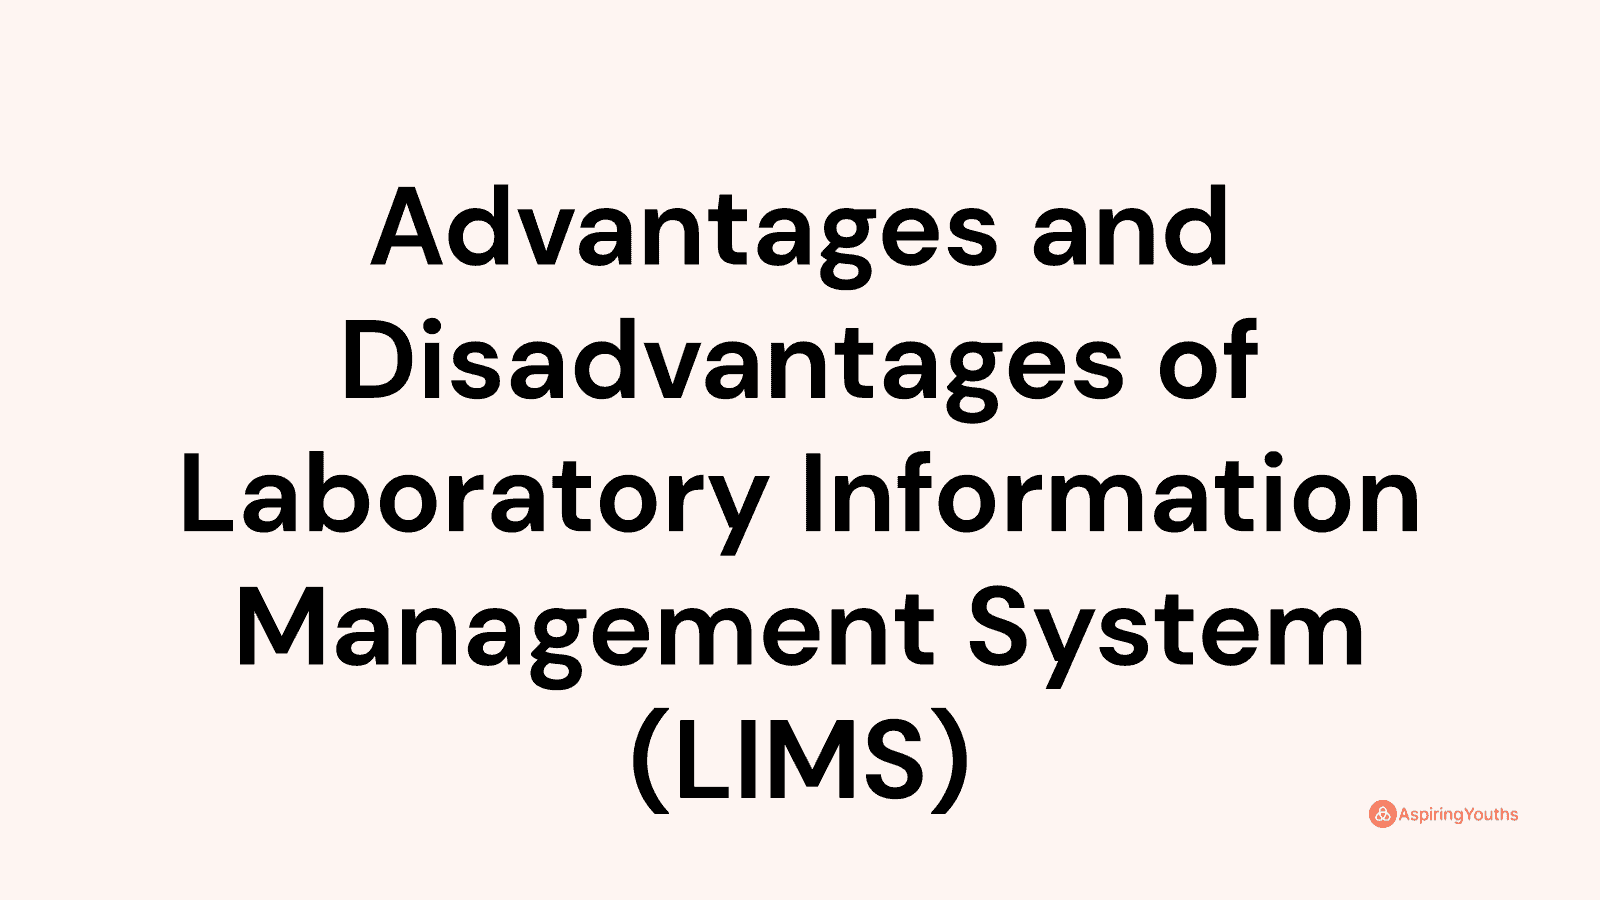 Advantages and disadvantages of Laboratory Information Management System (LIMS)